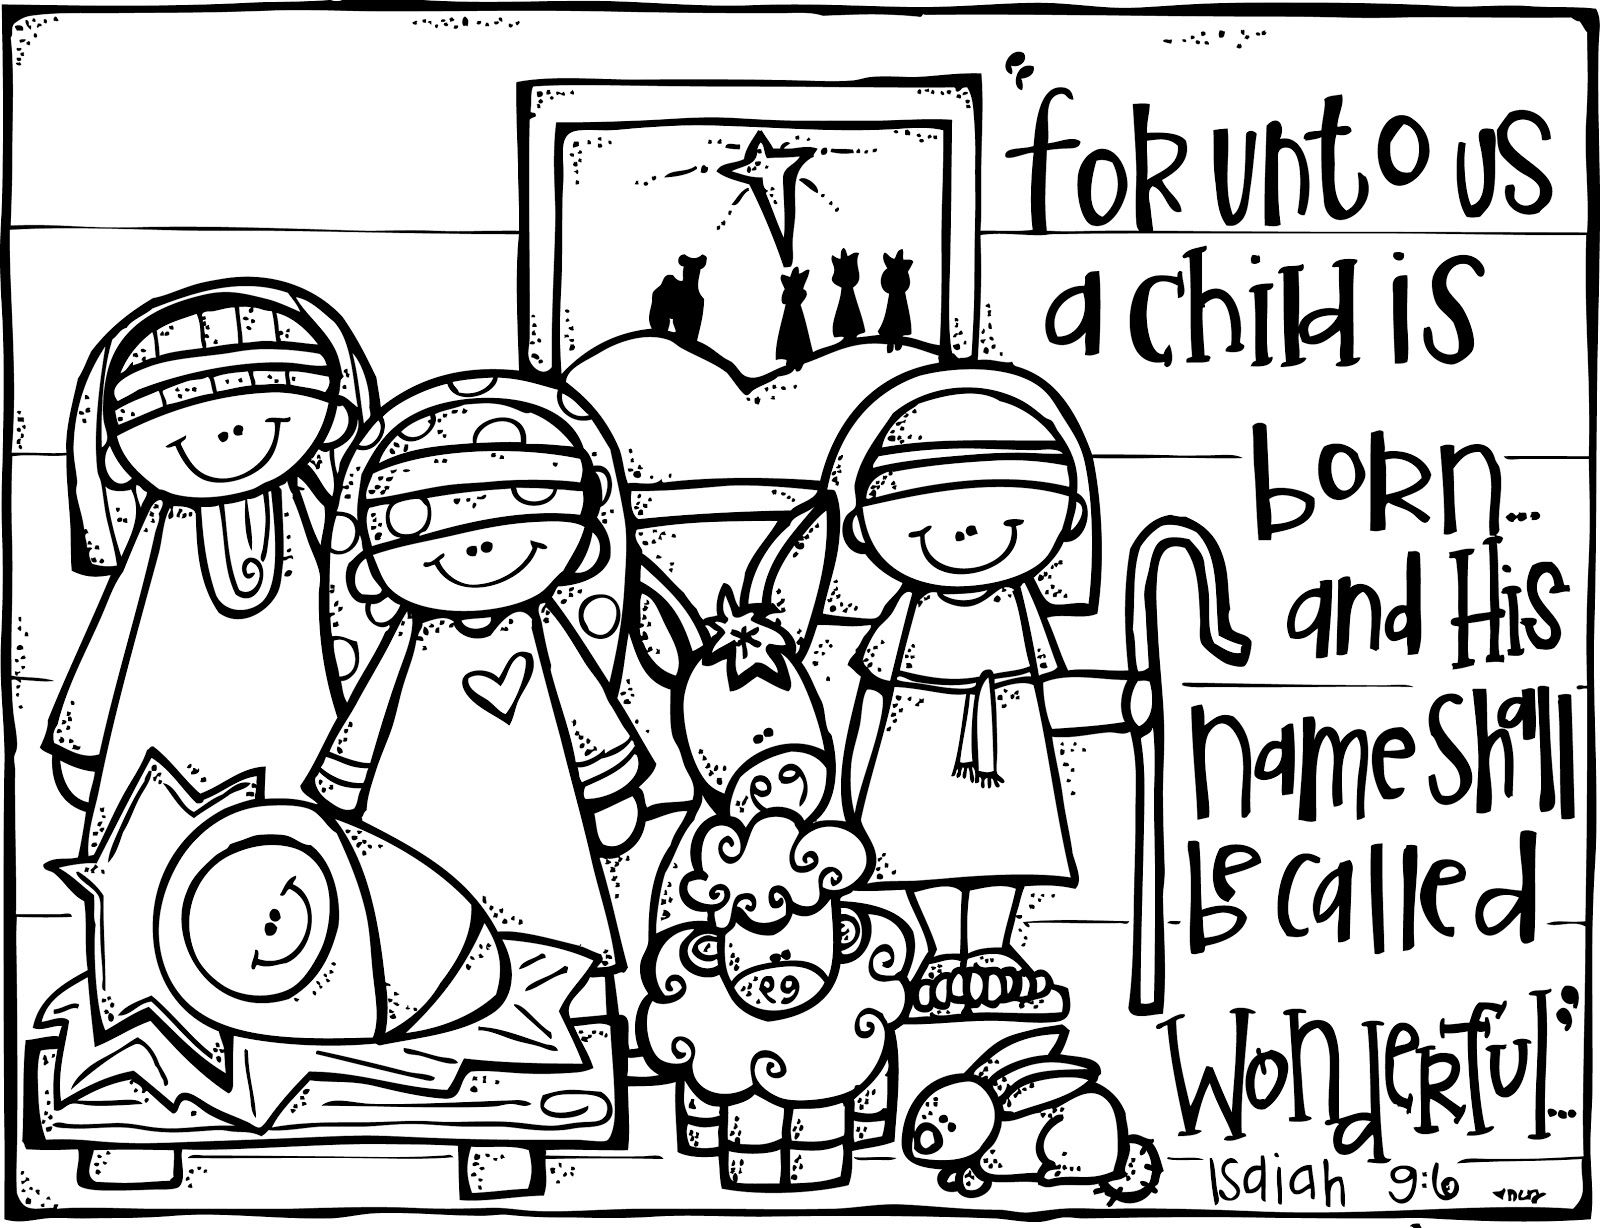 Christian Christmas Coloring Pages